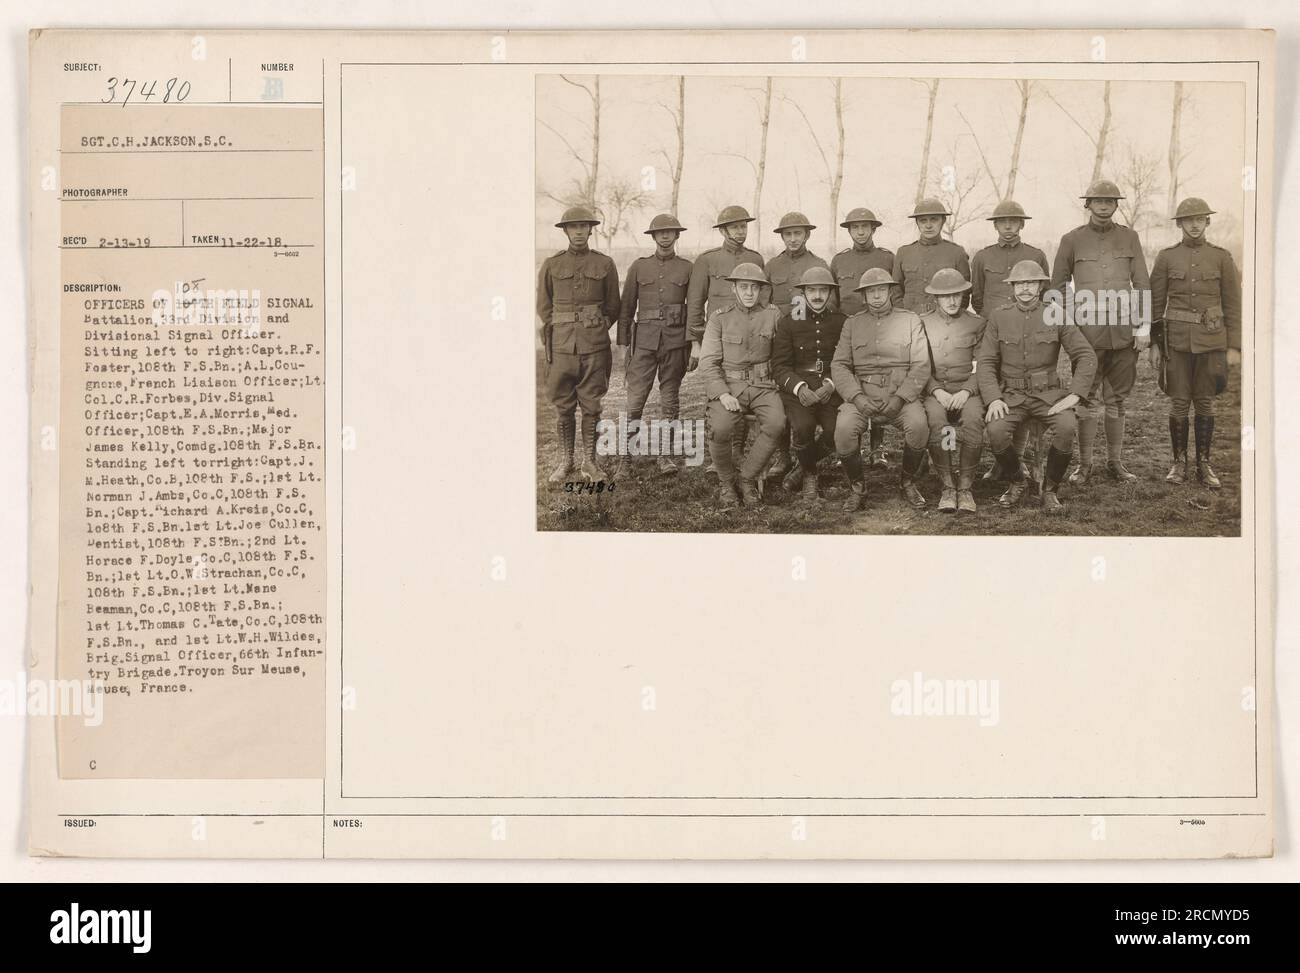 This is a photograph taken on November 22, 1918, featuring the officers of the 109th Field Signal Battalion, 33rd Division, and Divisional Signal Officer. The individuals in the photo are identified, along with their respective positions and units. The location is Treyon Sur Meuse, Heuse, France. The photograph is labeled with the registration number 37450. Stock Photo